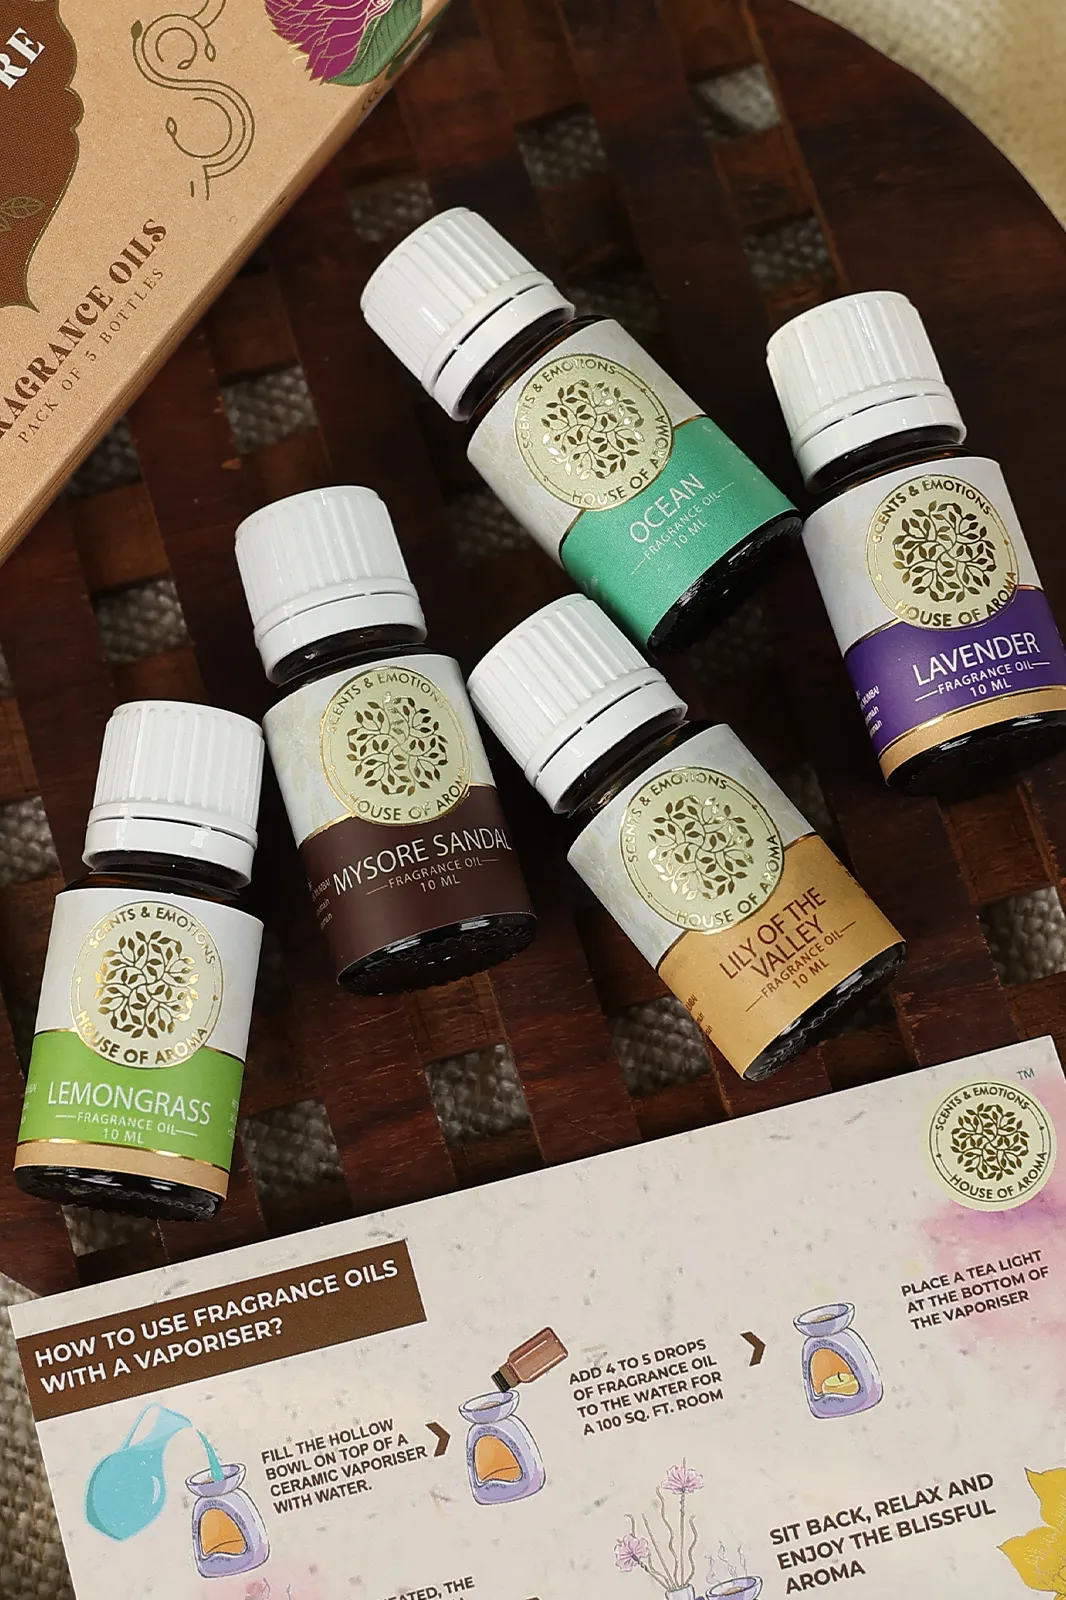 Aromatic fragrance oil combo pack, Aromatic fragrance oil, Fragrance oil, Aromatic oil, Combo pack, Scented fragrance oil, combo offer, oil with fragrance, aroma products, best aromatic oil, aromatic fragrance oil combo pack, candle fragrance oil, house of aroma